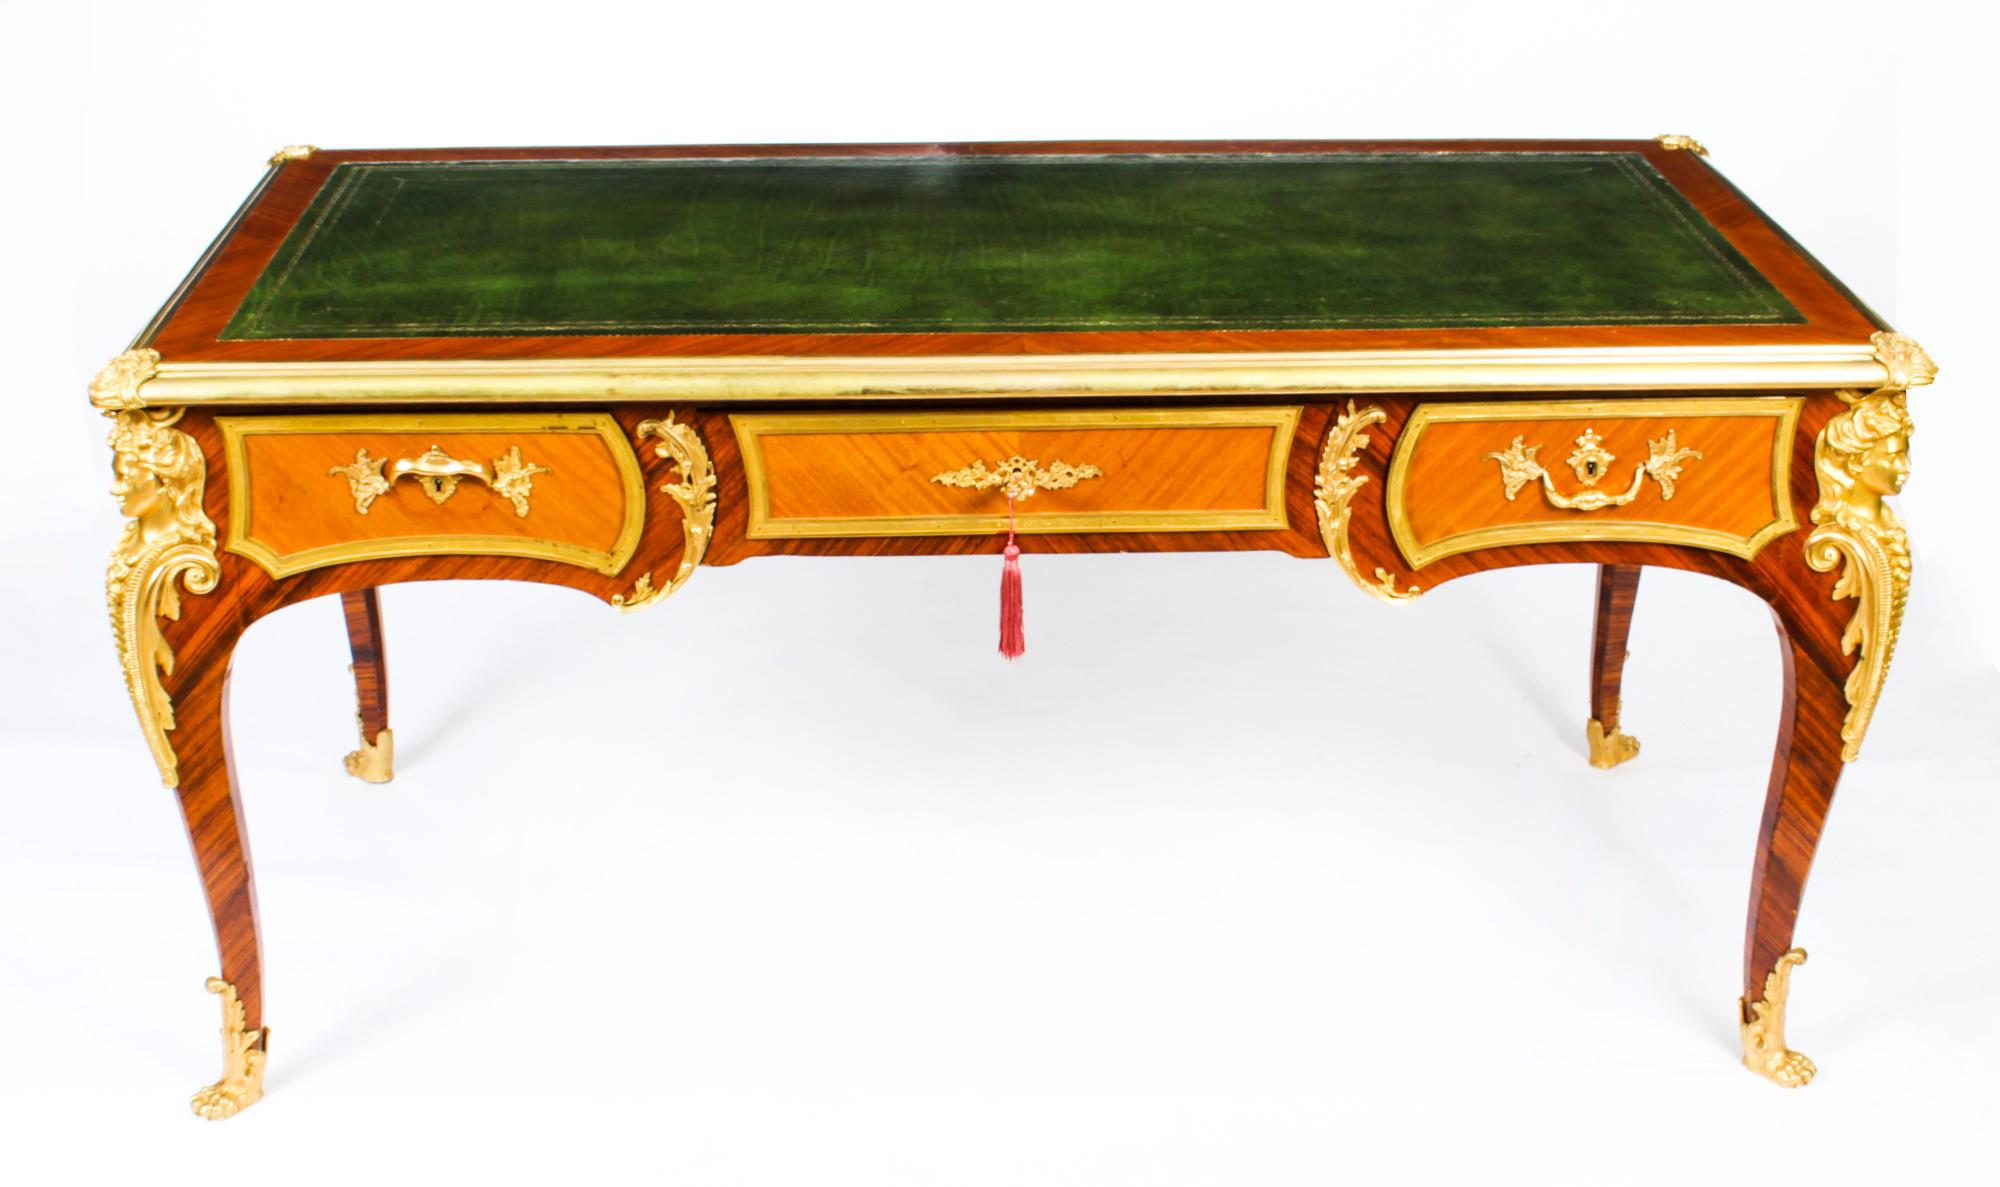 This is a gorgeous antique French Louis Revival gilt bronze mounted amaranth bureau plat, Circa 1880 in date.
 
The rectangular top has a decorative gilt bronze border, raised corner cartouches and a superb inset gold tooled green leather writing